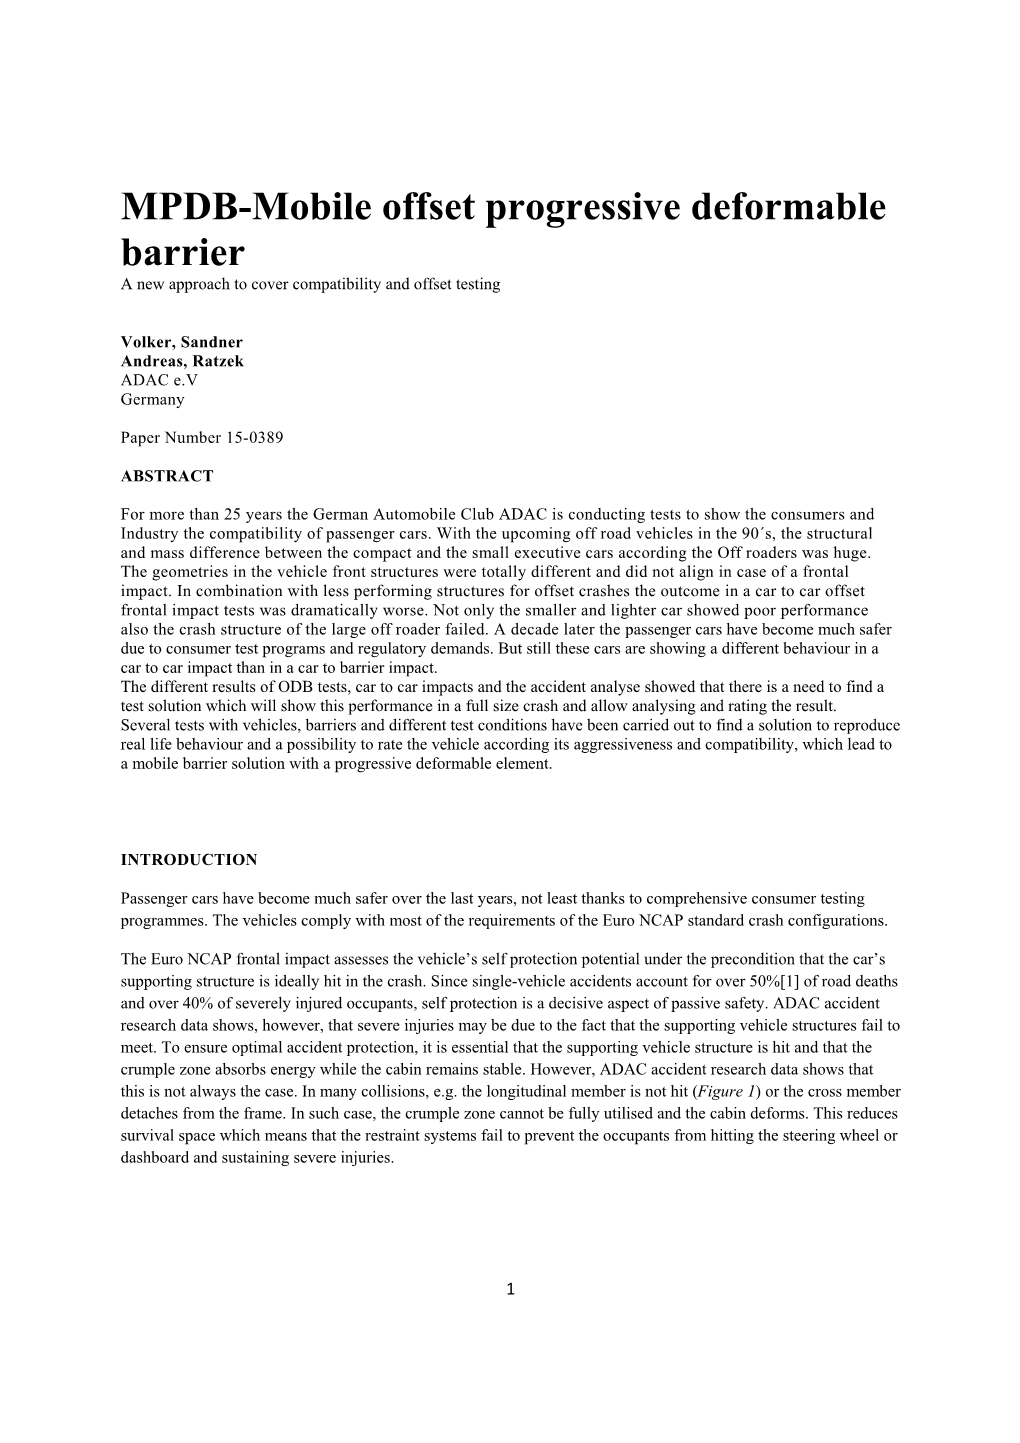 MPDB-Mobile Offset Progressive Deformable Barrier a New Approach to Cover Compatibility and Offset Testing